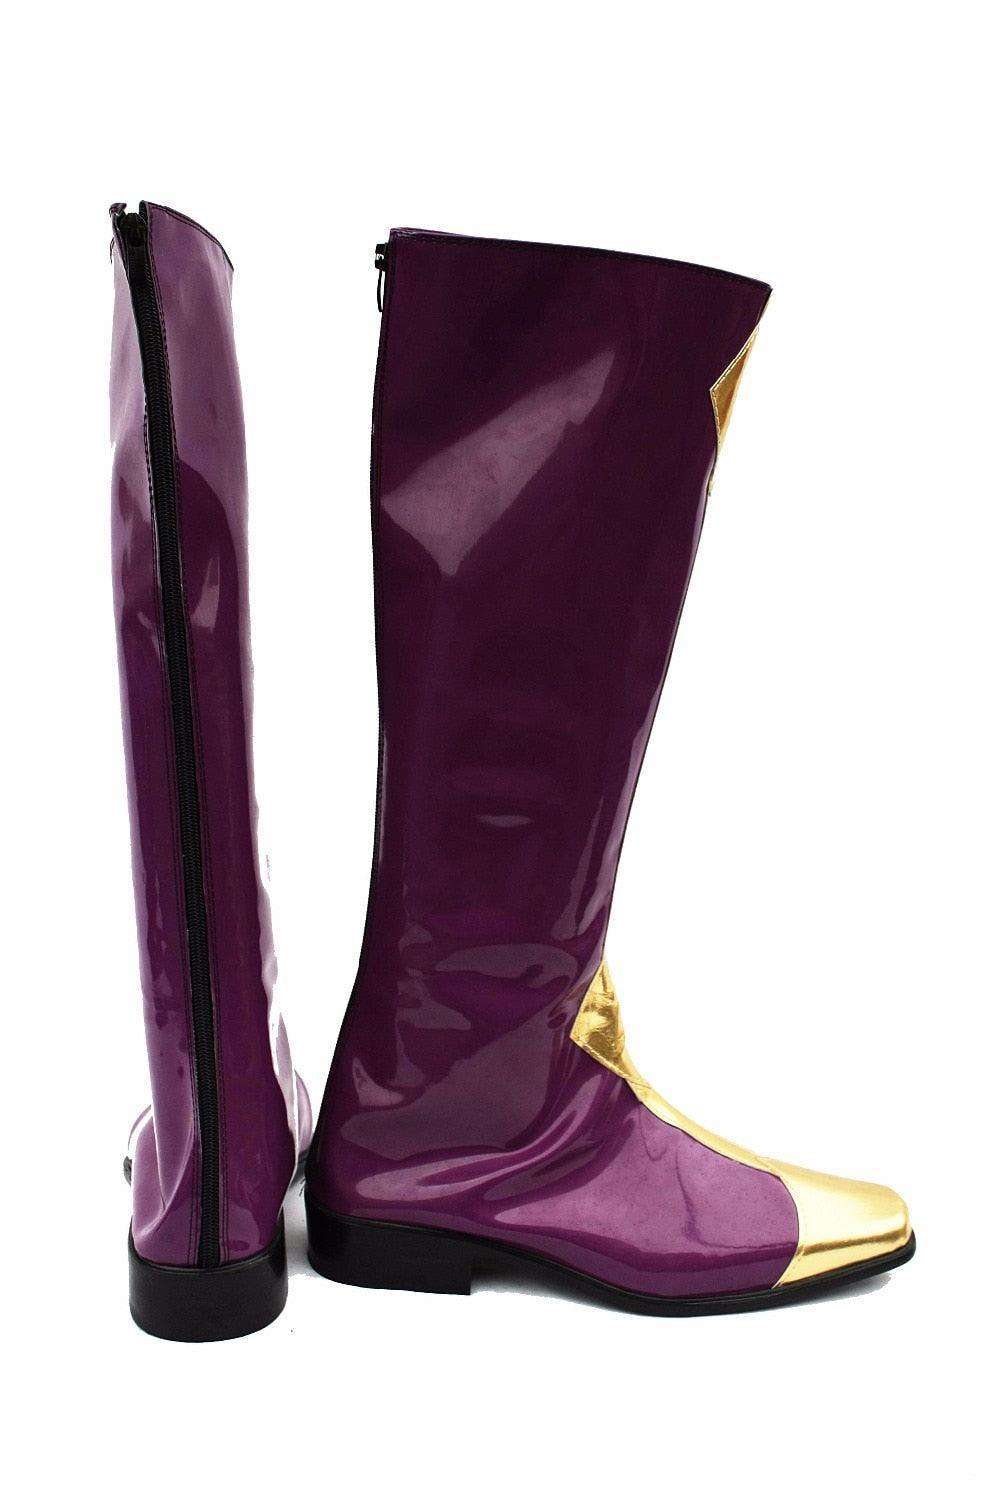 Code Geass Lelouch of the Rebellion Zero Custom Made Anime Cosplay Boots